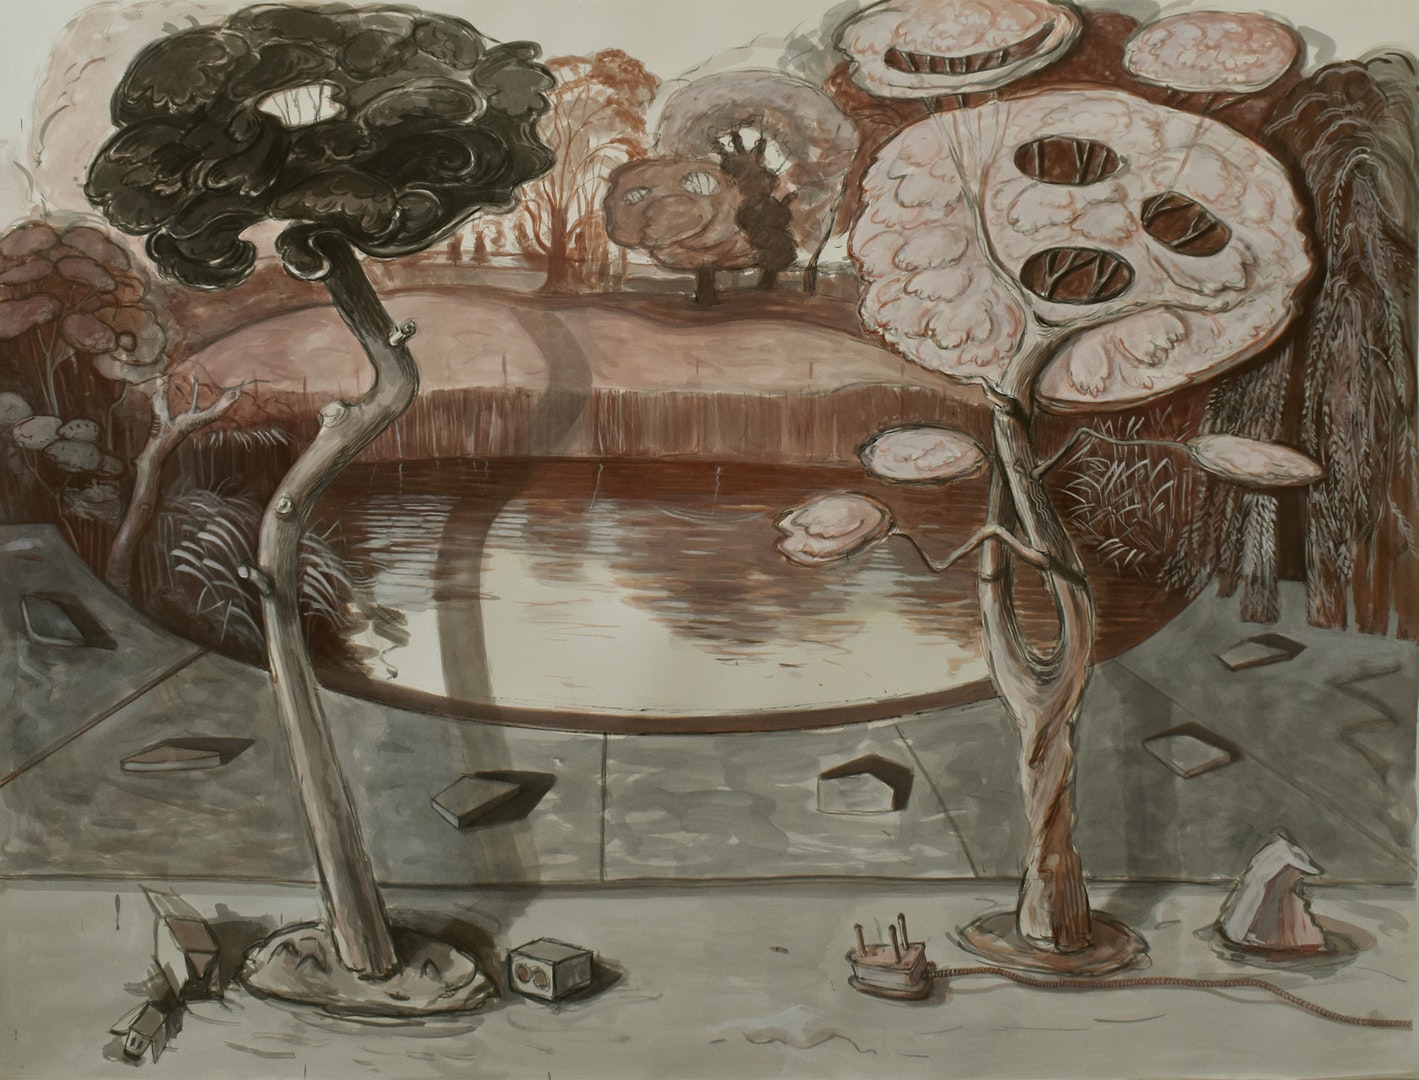 Pond', Angelina Davis, Watercolour, ink, and gouache on paper, 154 x 220 cm